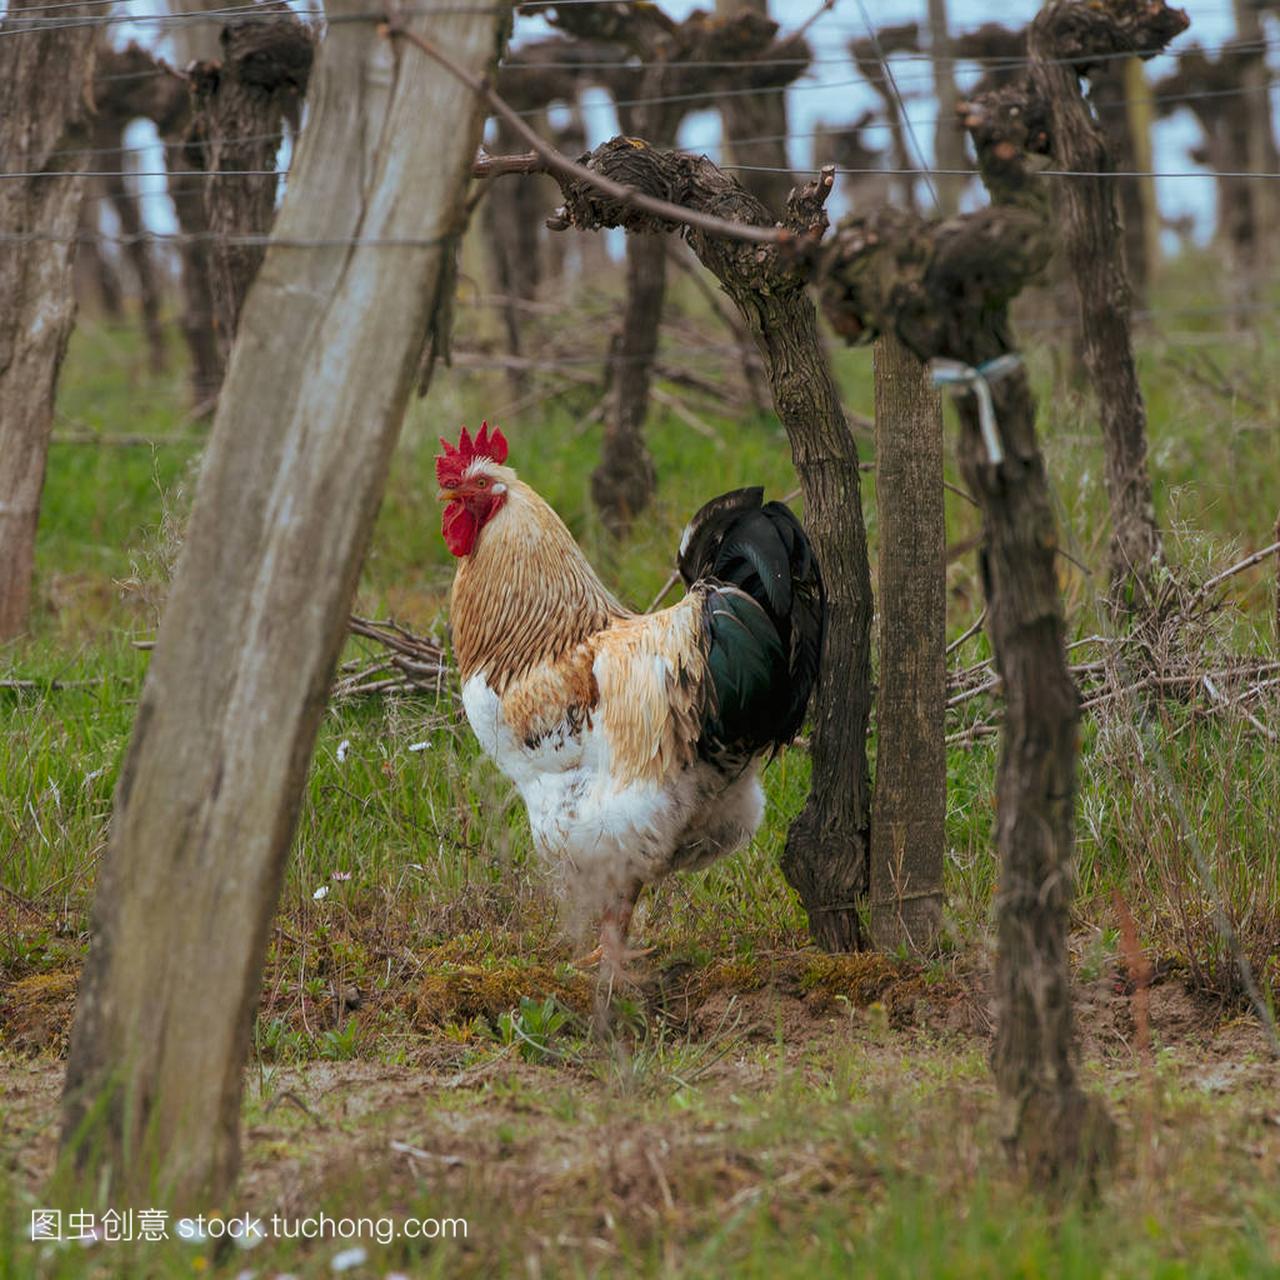 en on traditional free range poultry farm in the vineyards